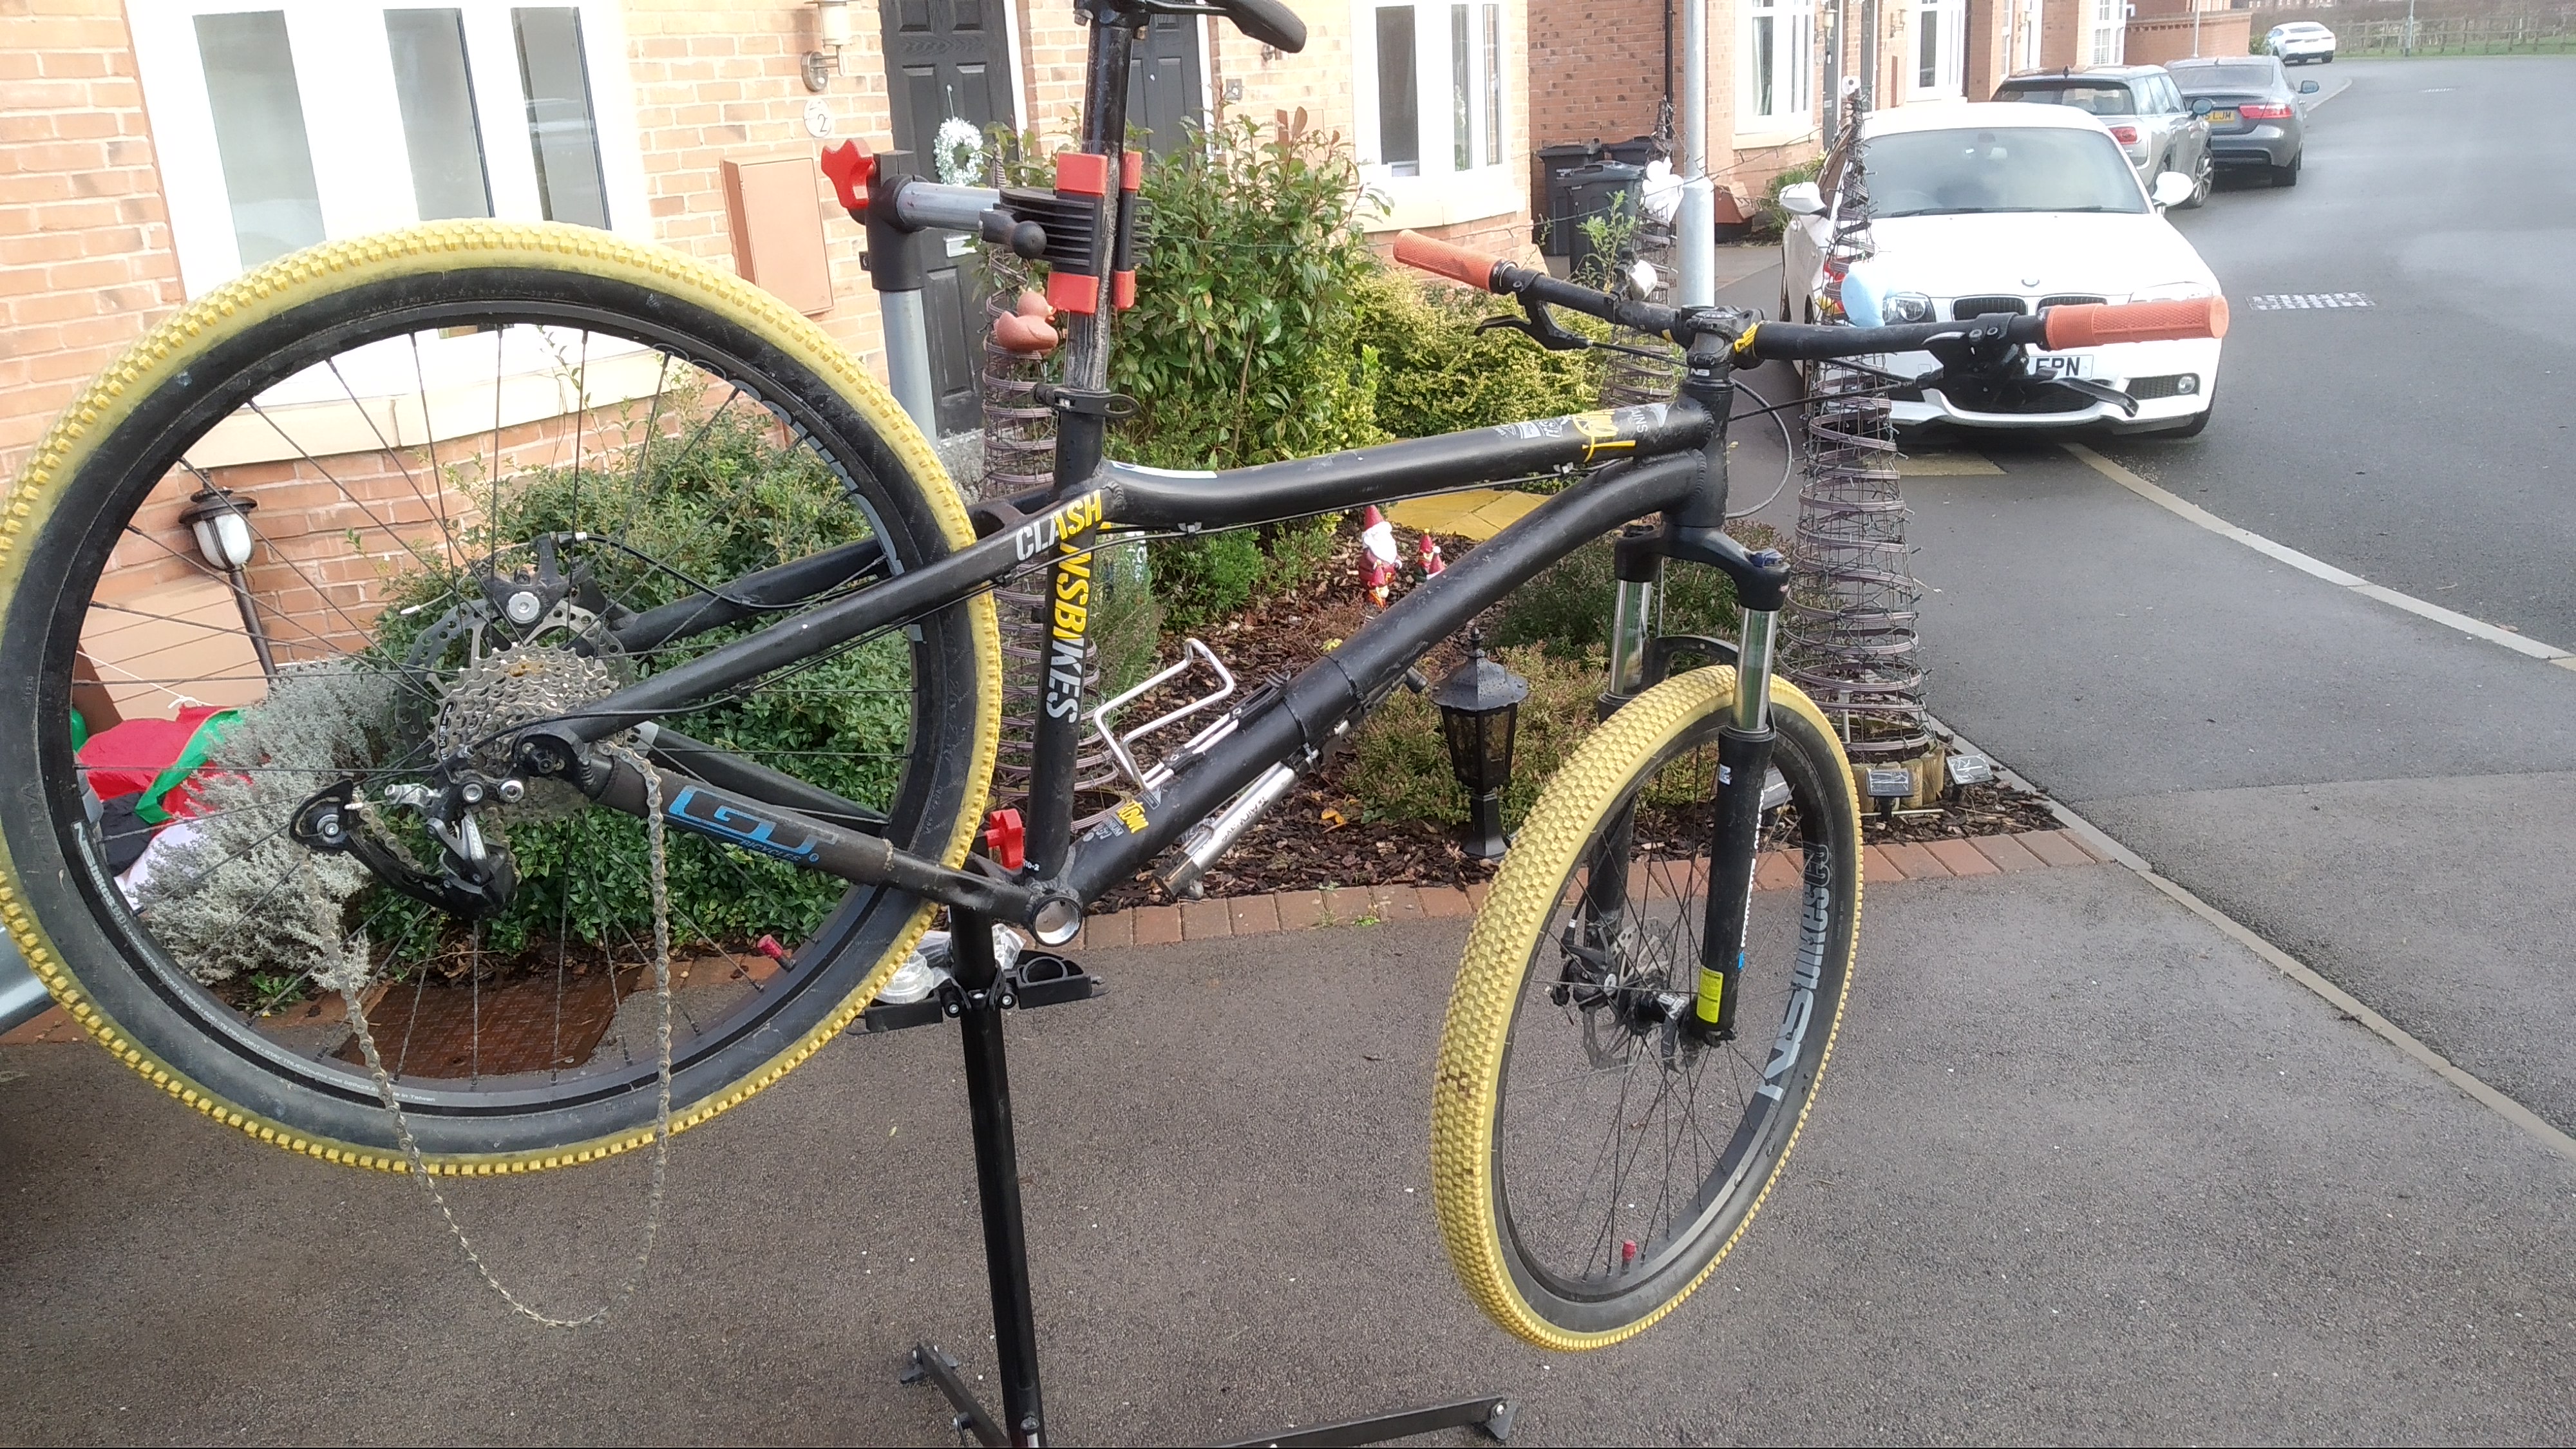 The whole bike is now in a stand on the driveway. No cranks or bottom bracket is installed